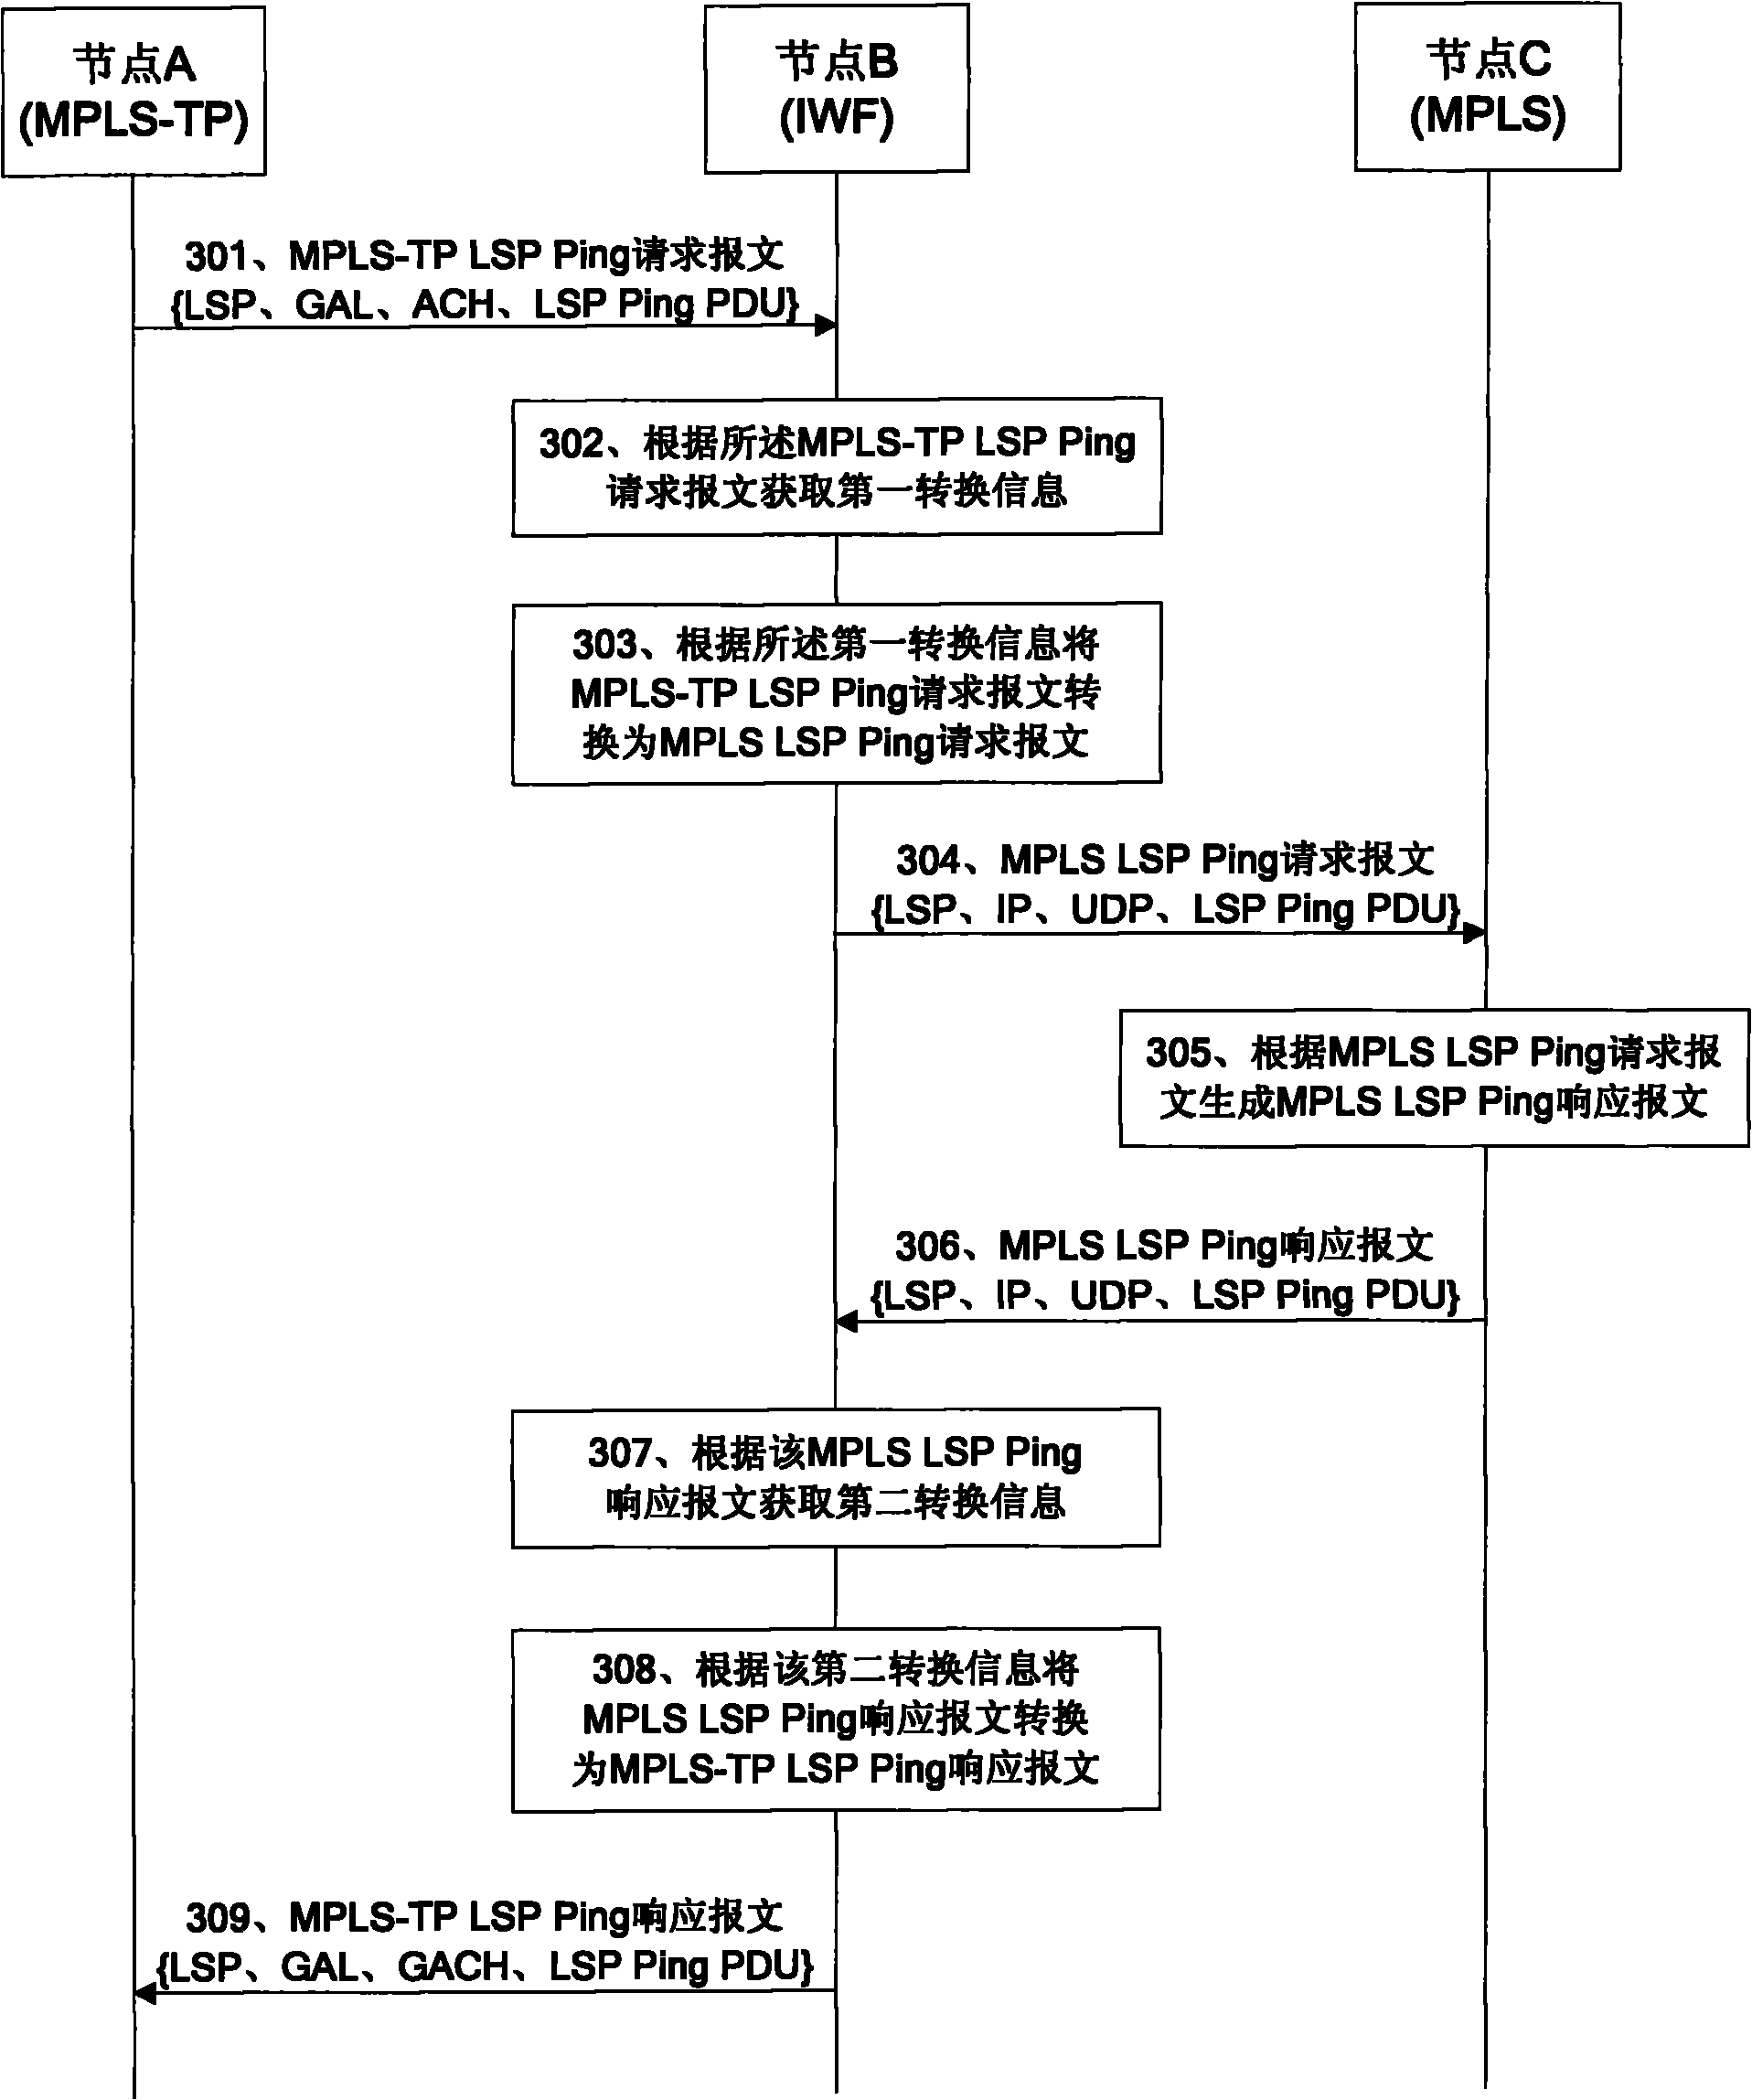 Method and device for switching OAM (Operations, Administration and Maintenance) between MPLS (Multiple-Protocol Label Switching) and MPLS-TP (Multiple-Protocol Label Switching-Transport Profile)